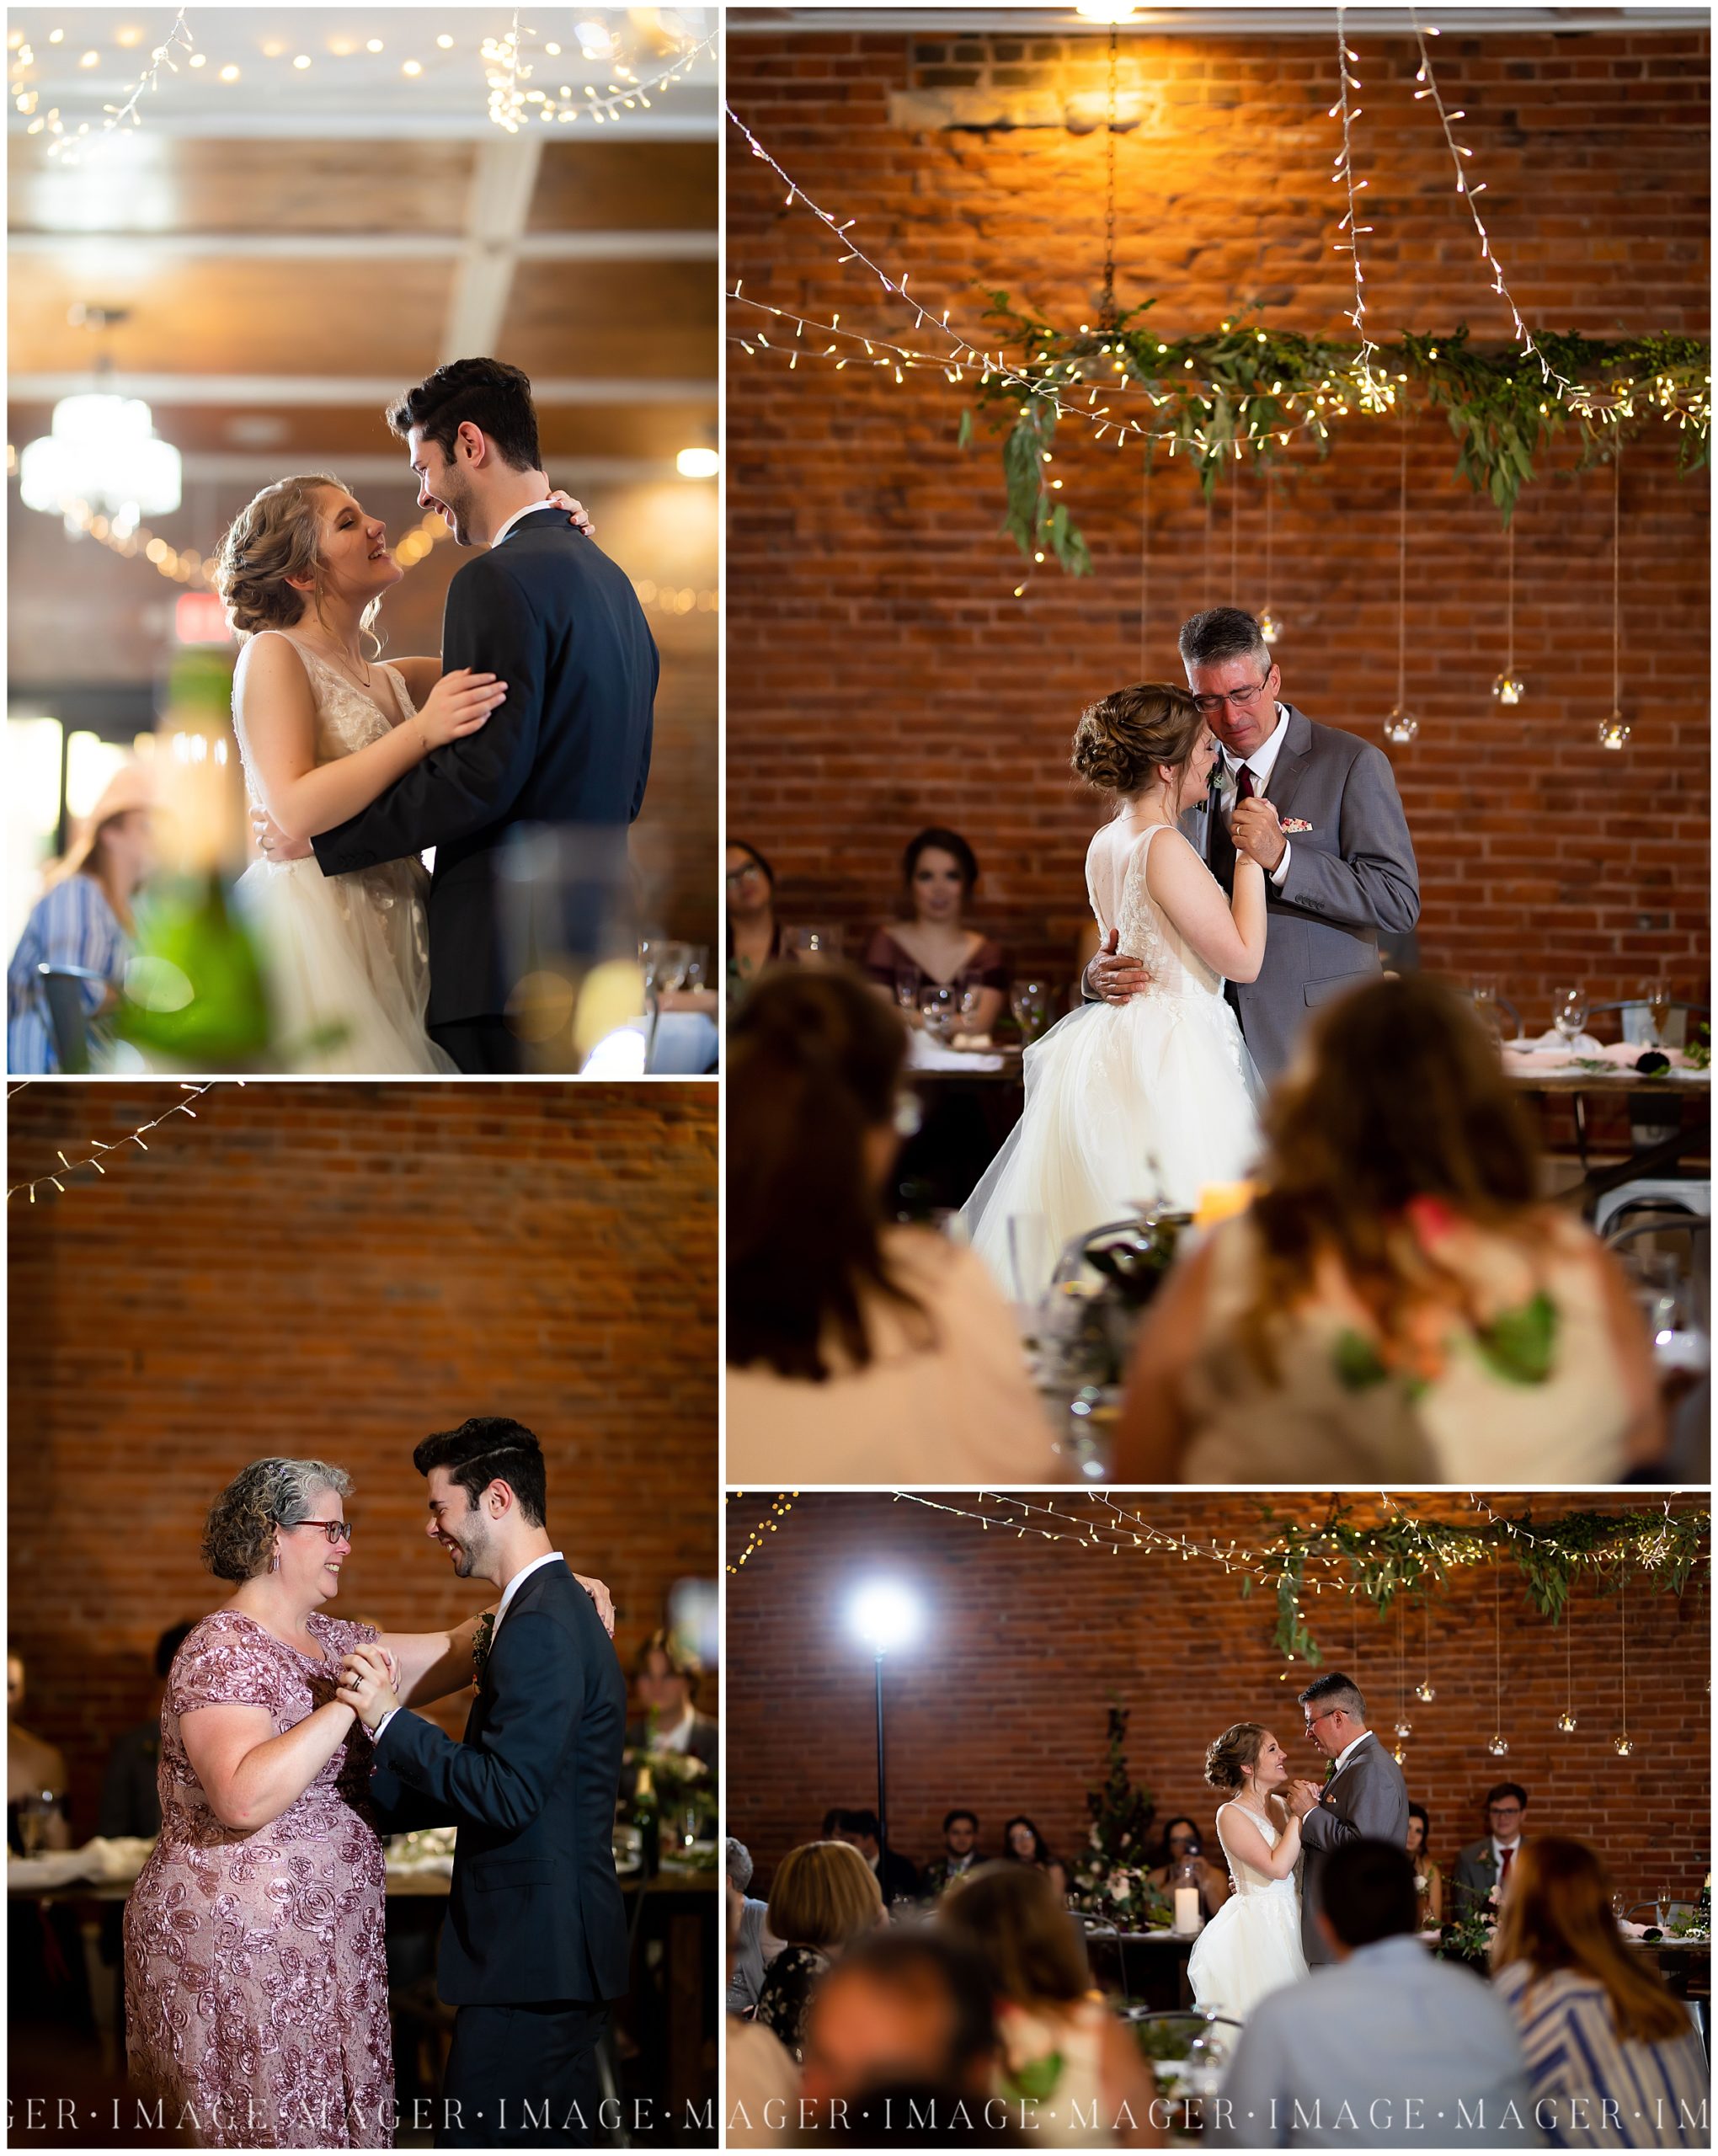 romantic first dances, town and country events